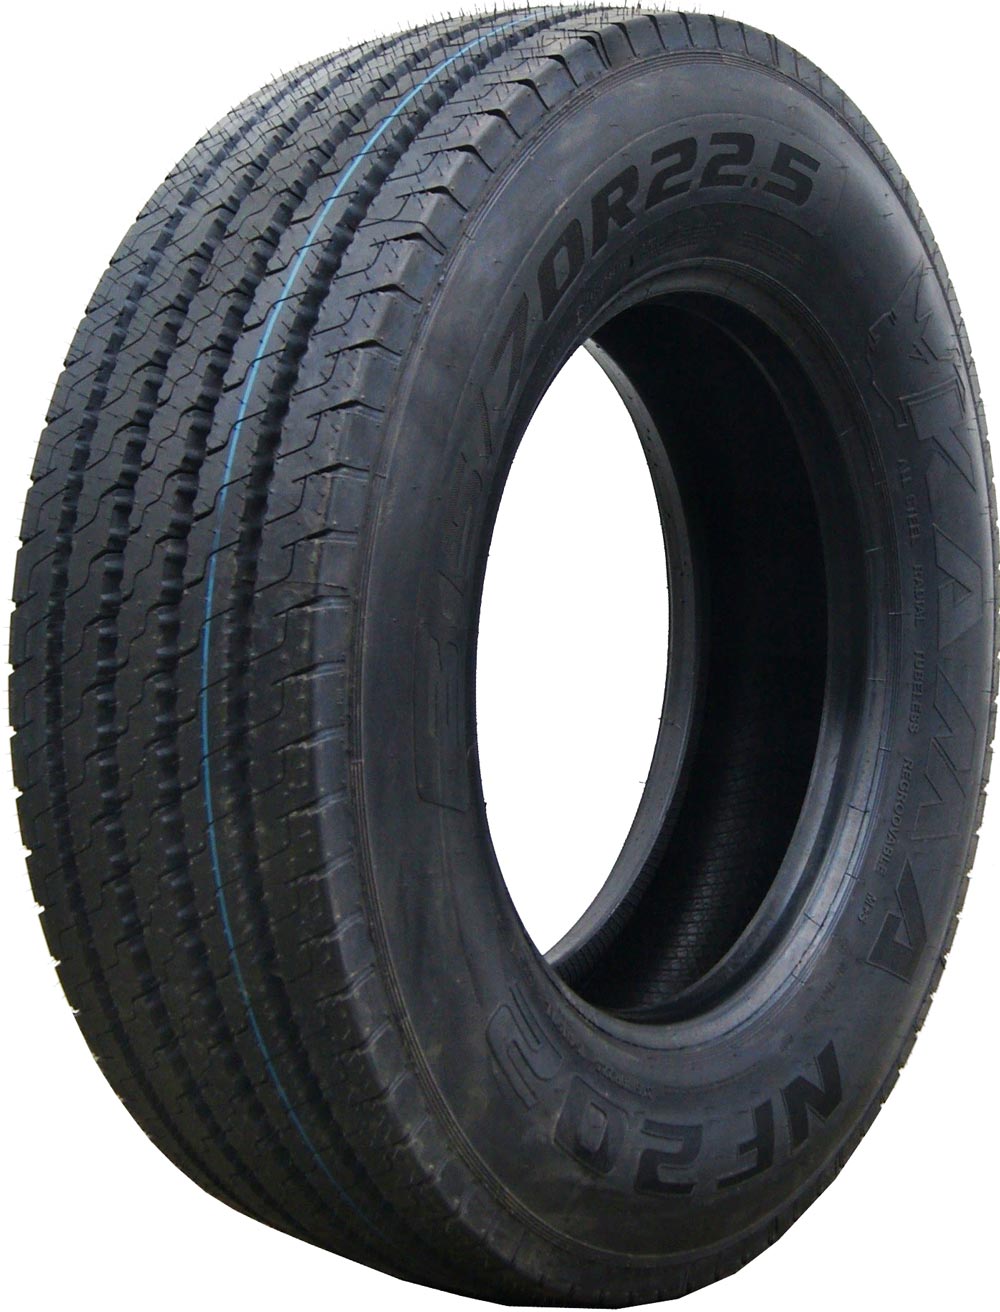 product_type-heavy_tires KAMA NF202 315/70 R22.5 154L